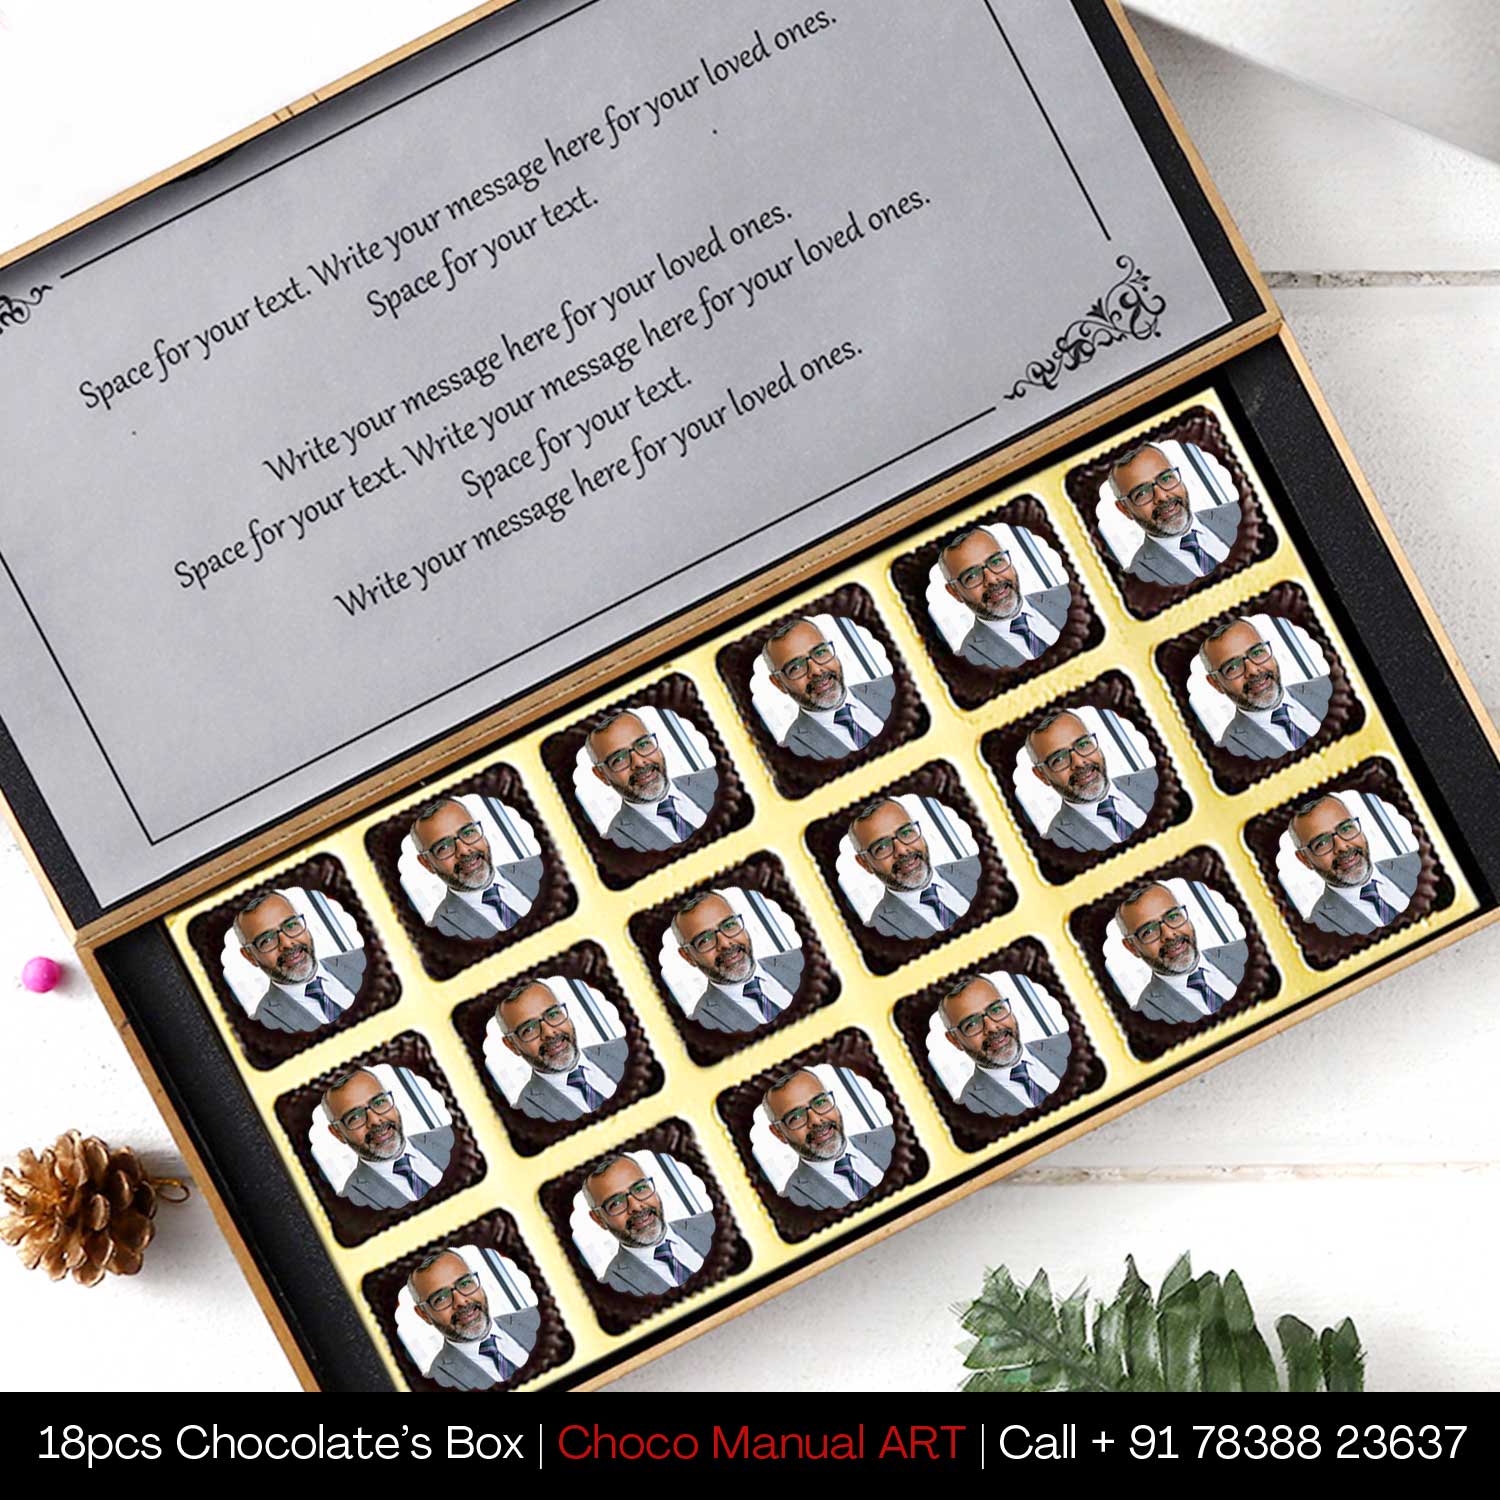 Buy Personalised Chocolate Box Online for Say Thank You